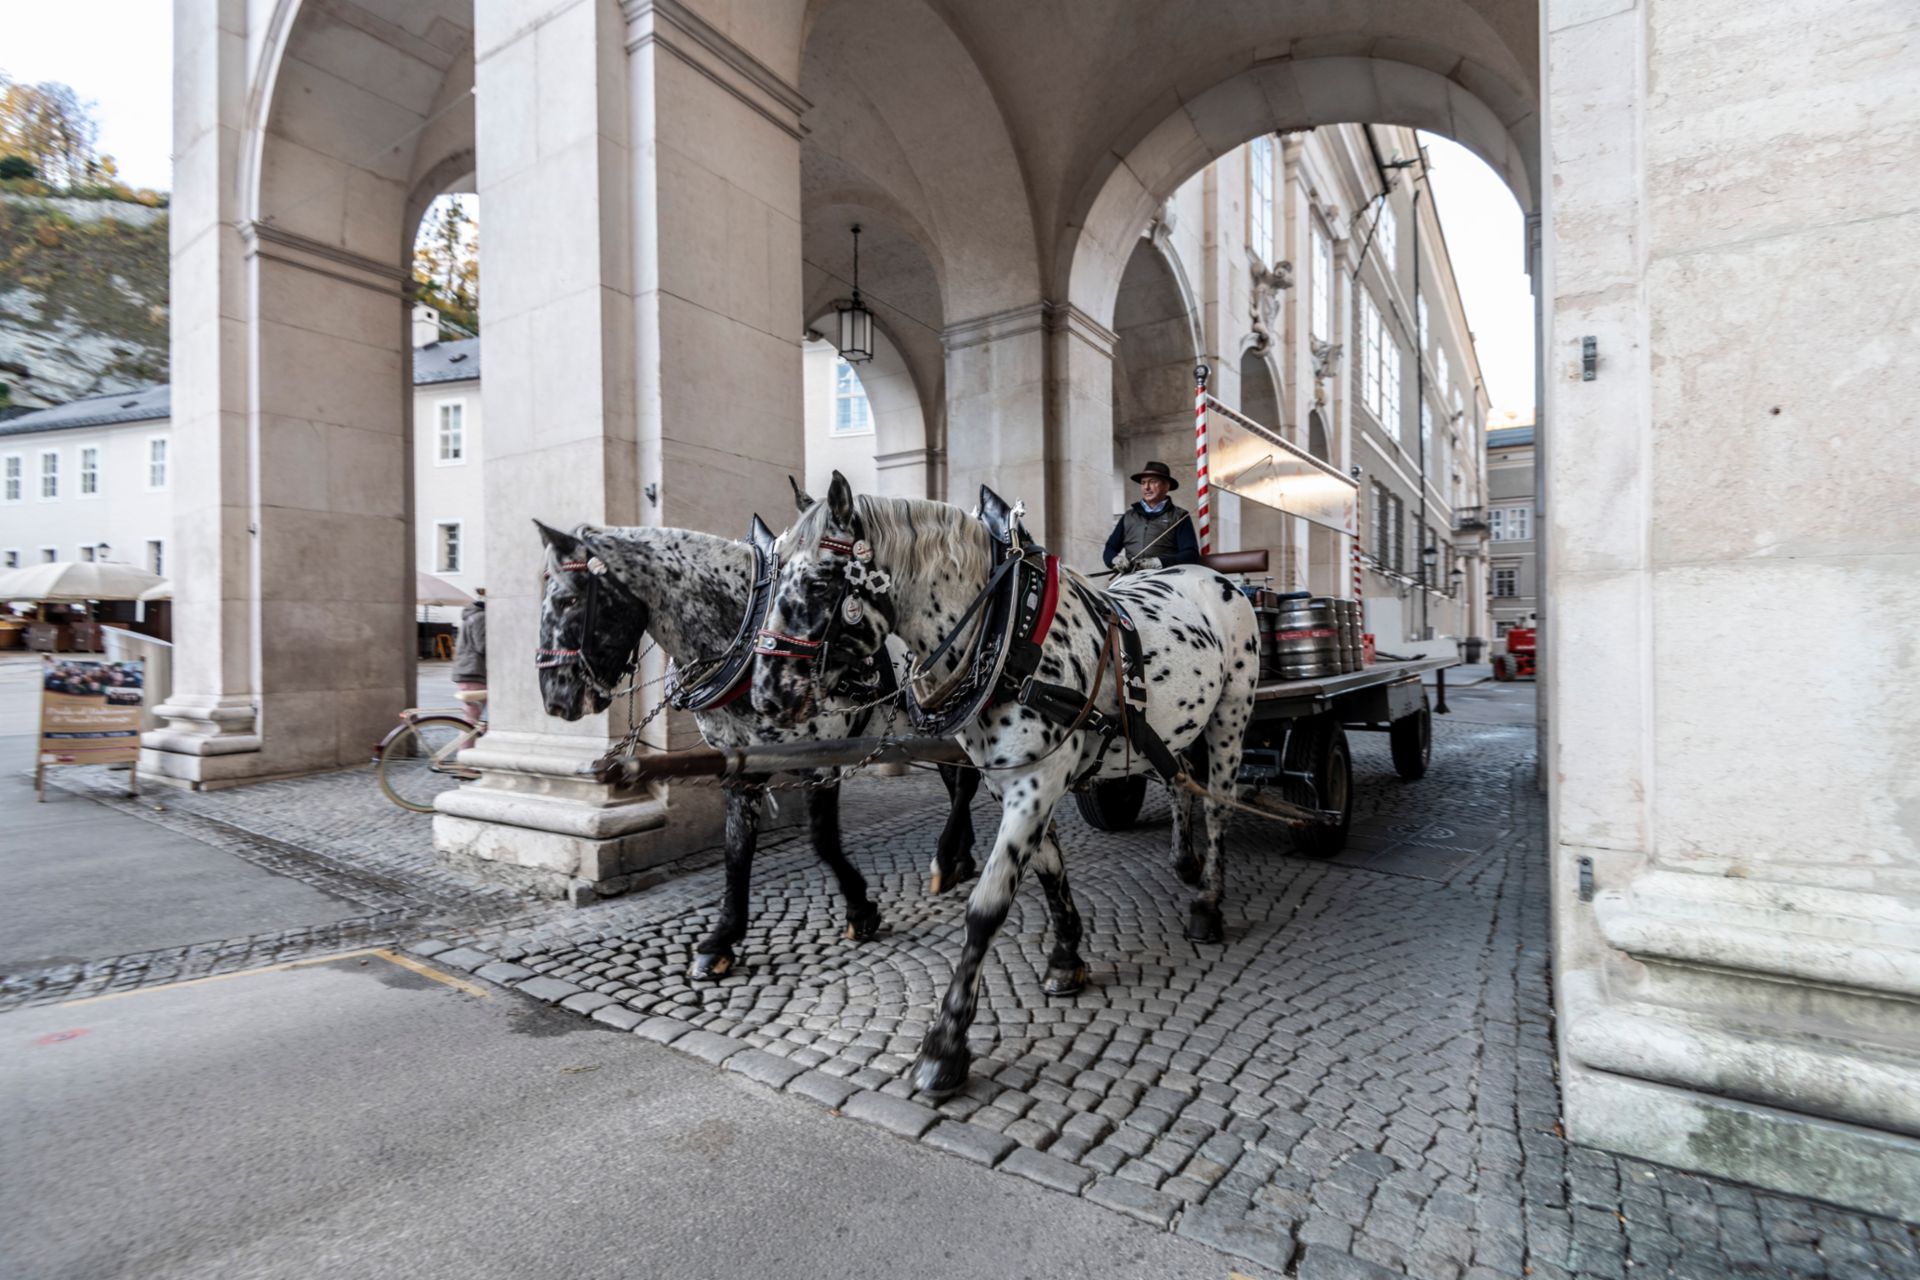 Stiegl’s coachman Herbert Schröder and the two stallions Lenz and Lord run daily deliveries to the historic district of Salzburg.